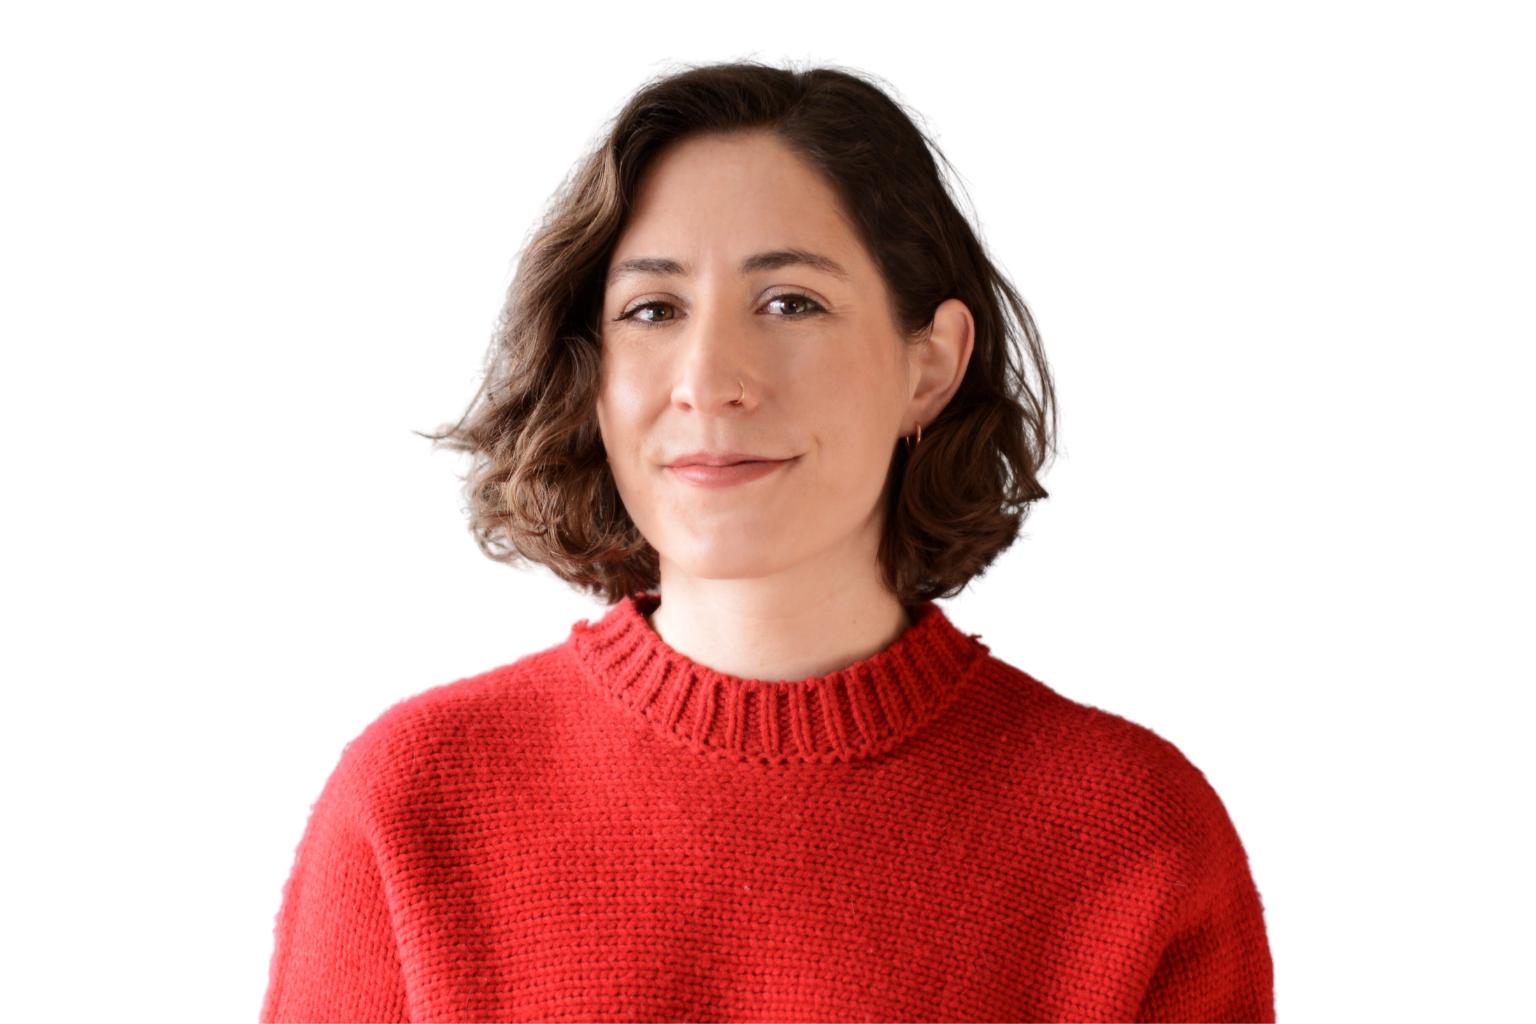 Professional portrait of recruiter Miriam Poole in a red sweater with a white background.